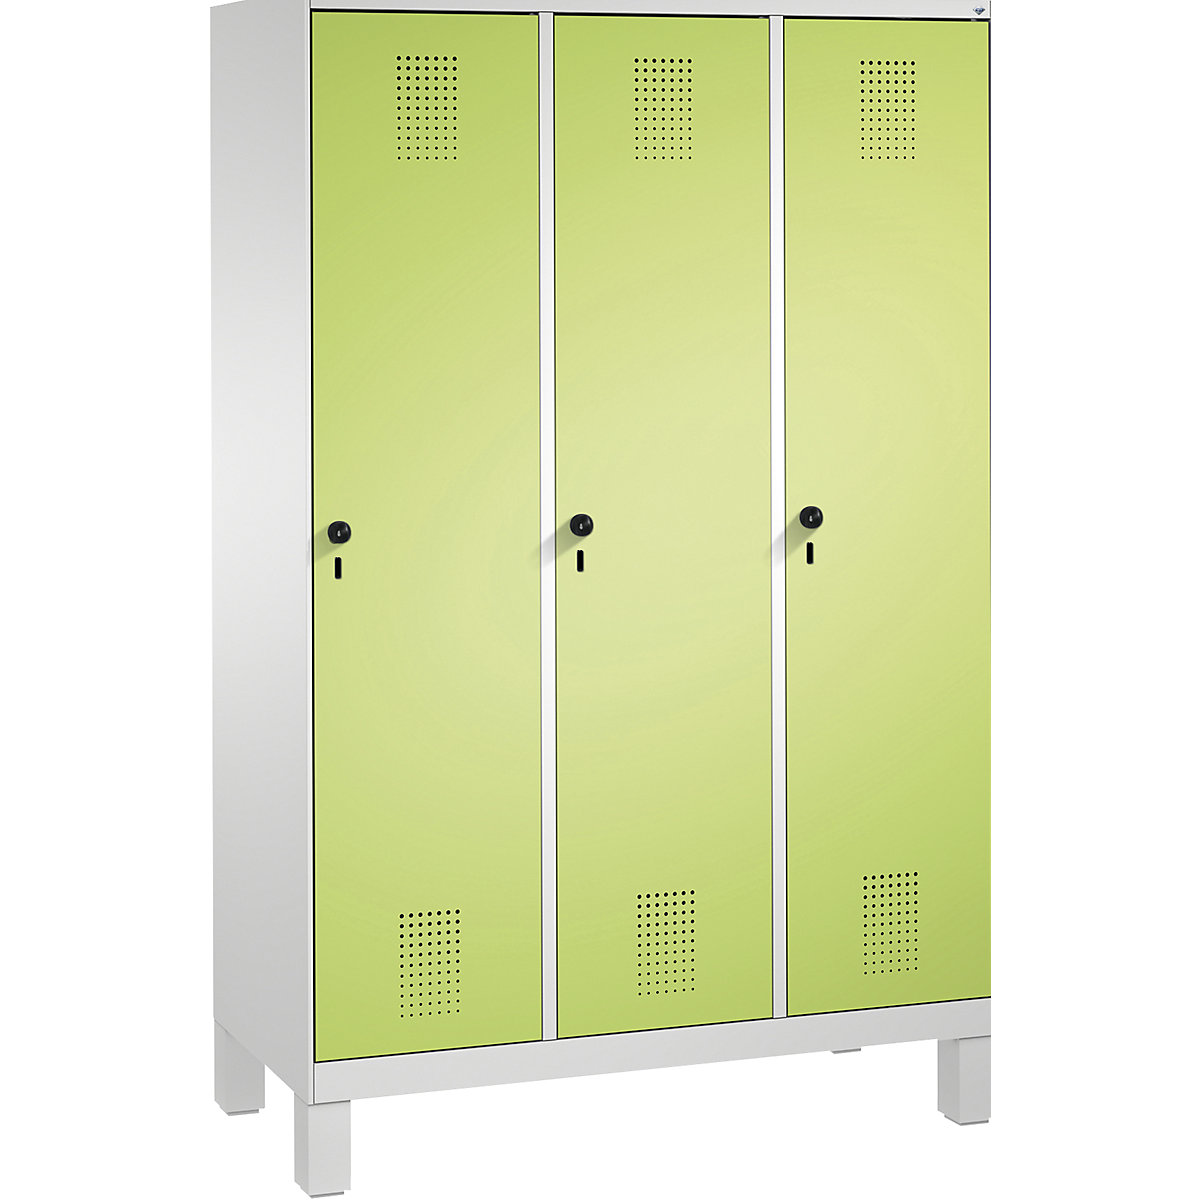 EVOLO cloakroom locker, with feet – C+P, 3 compartments, compartment width 400 mm, light grey / viridian green-9